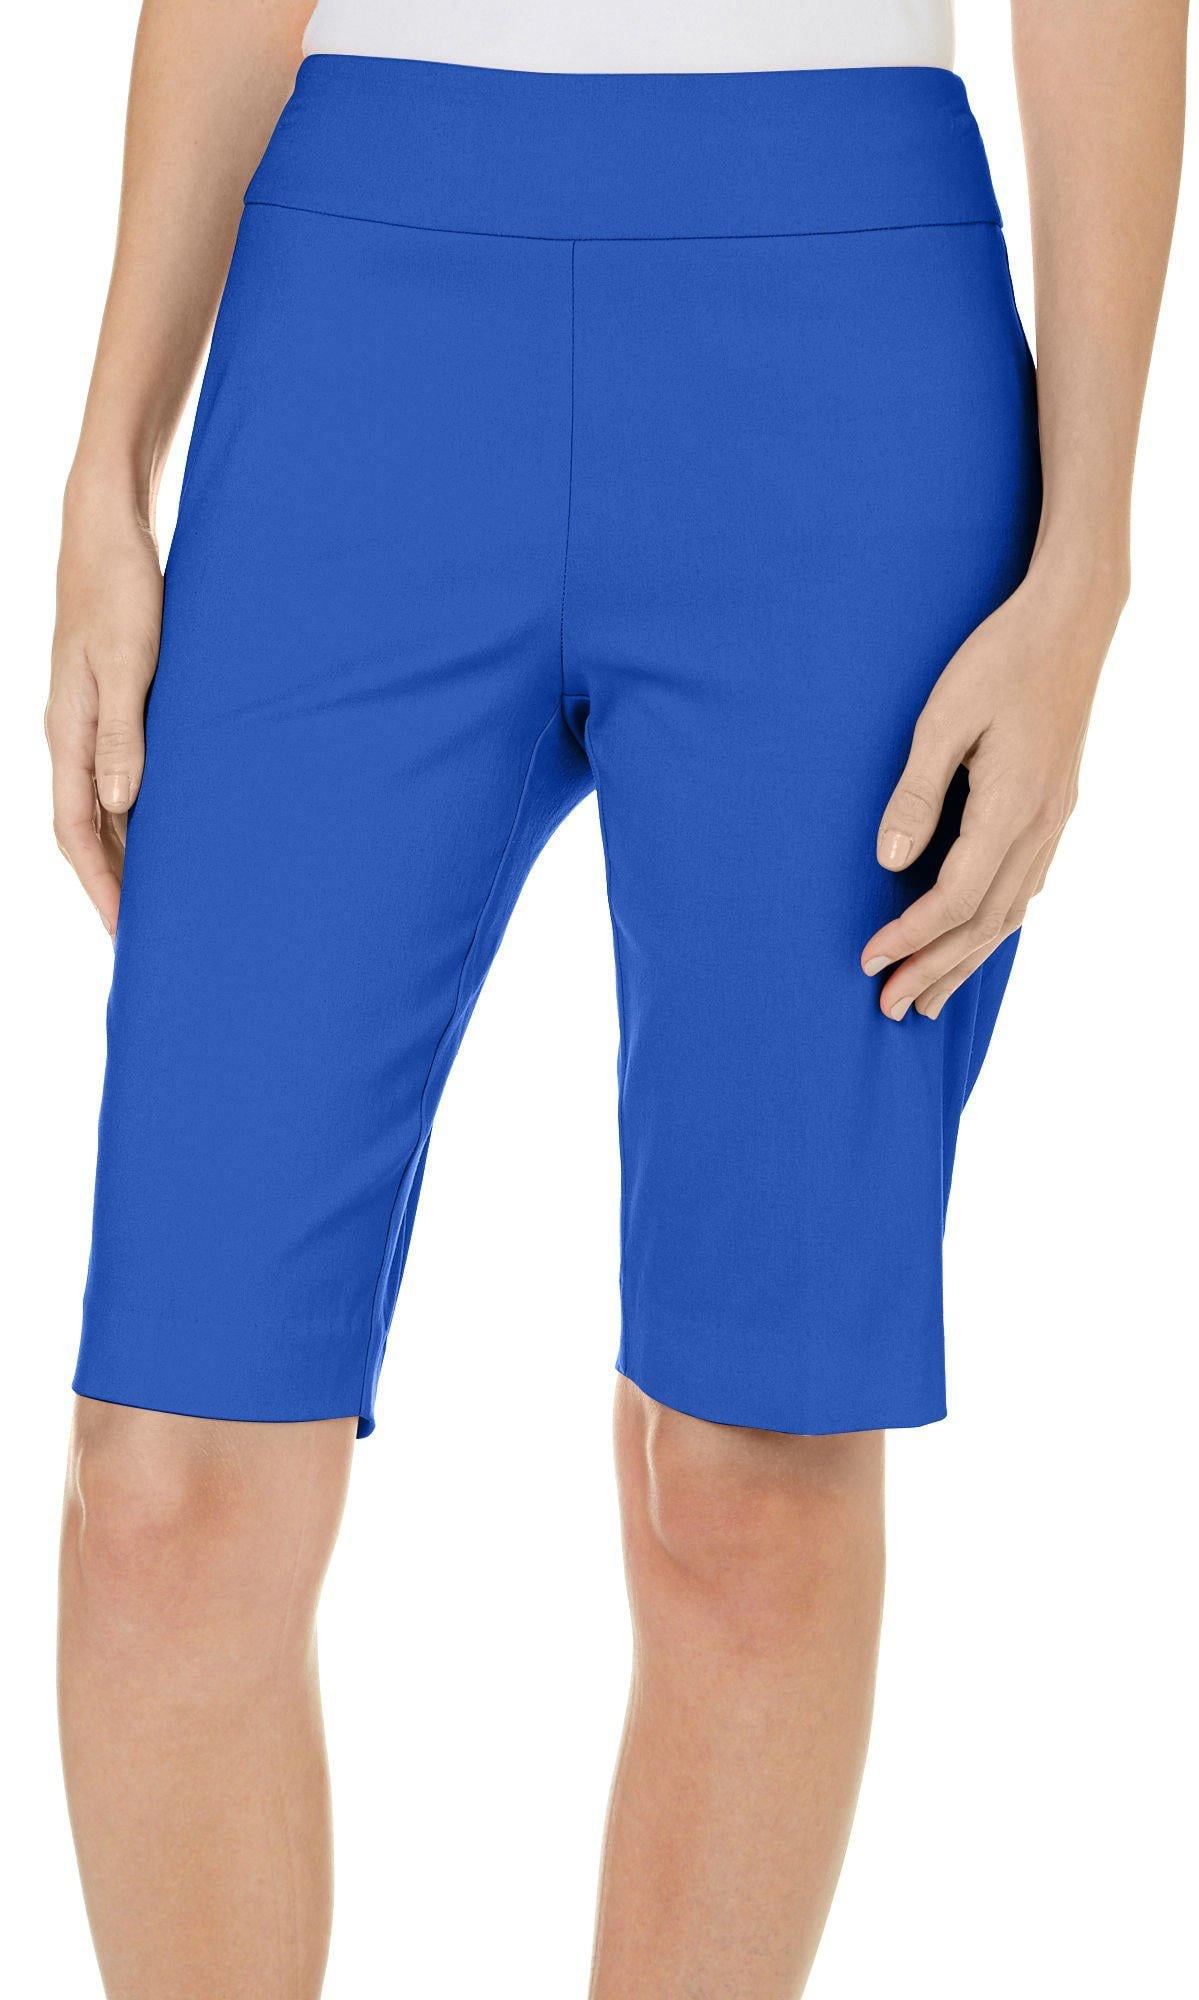 stretch shorts for women